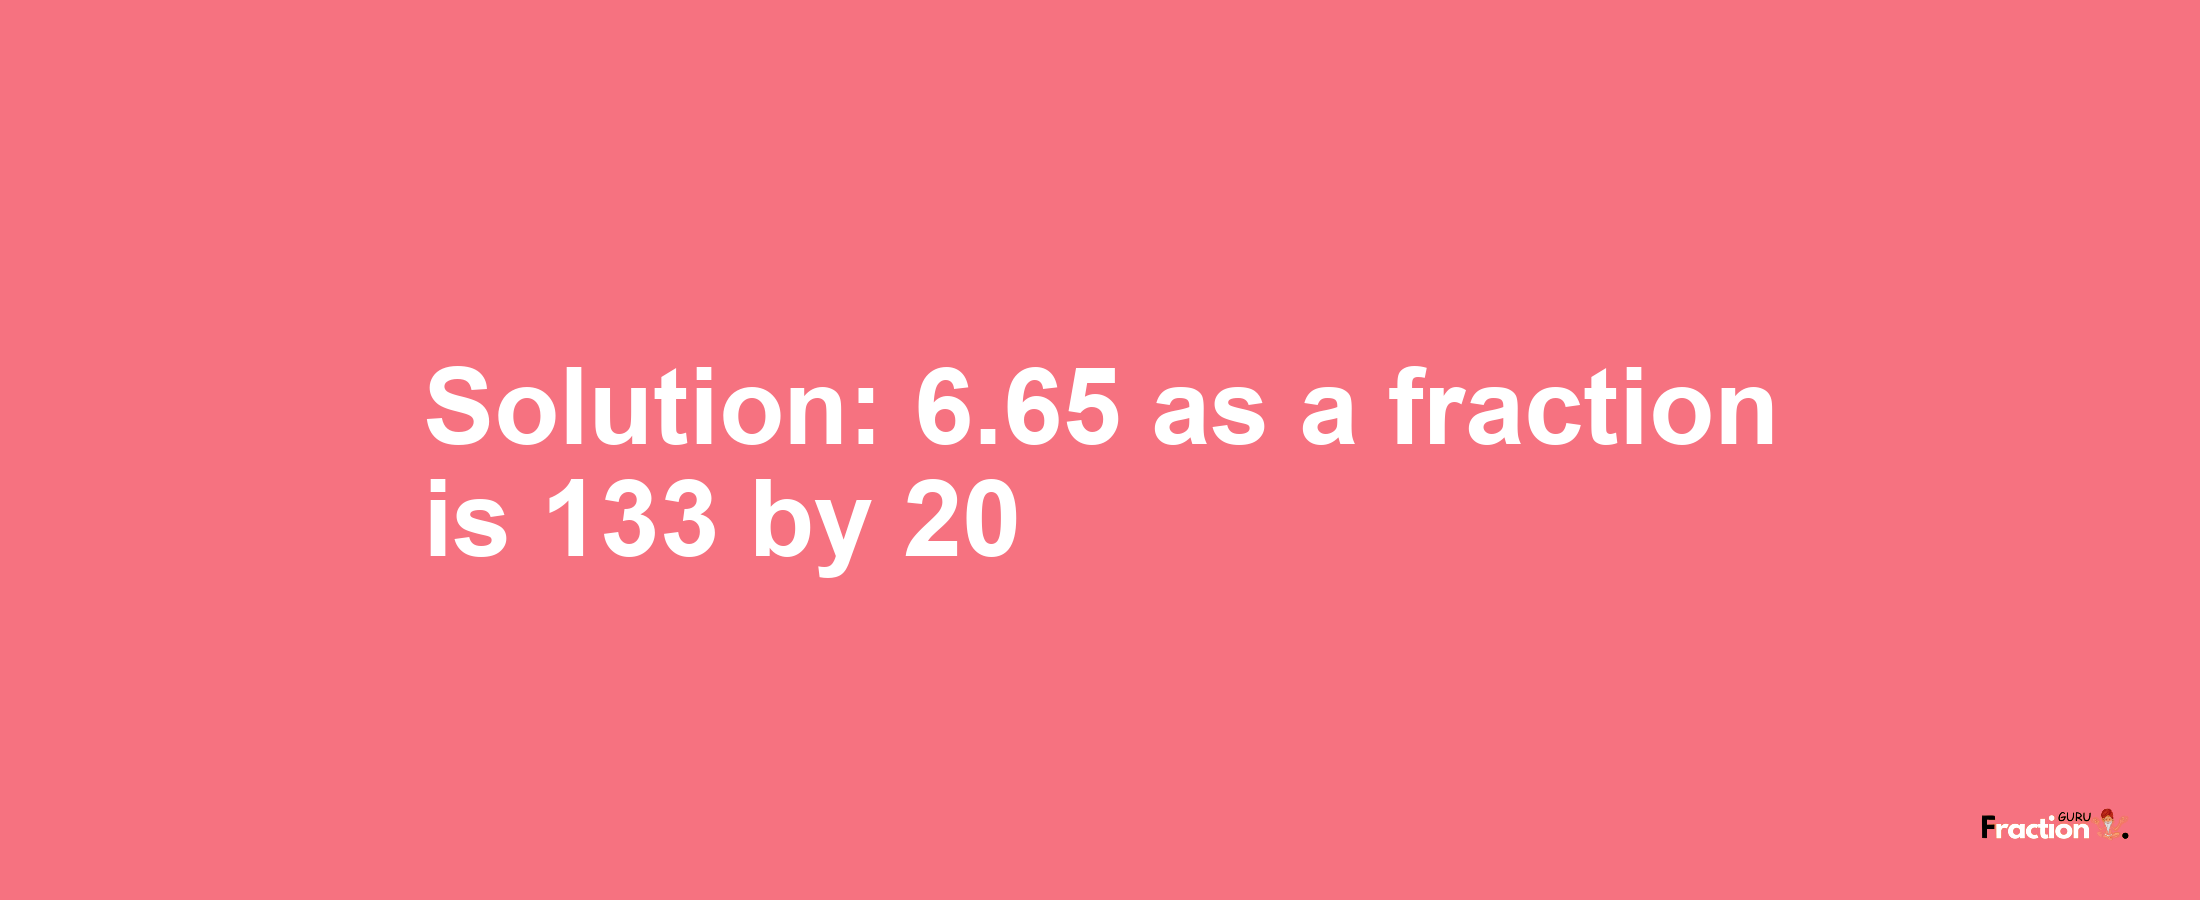 Solution:6.65 as a fraction is 133/20